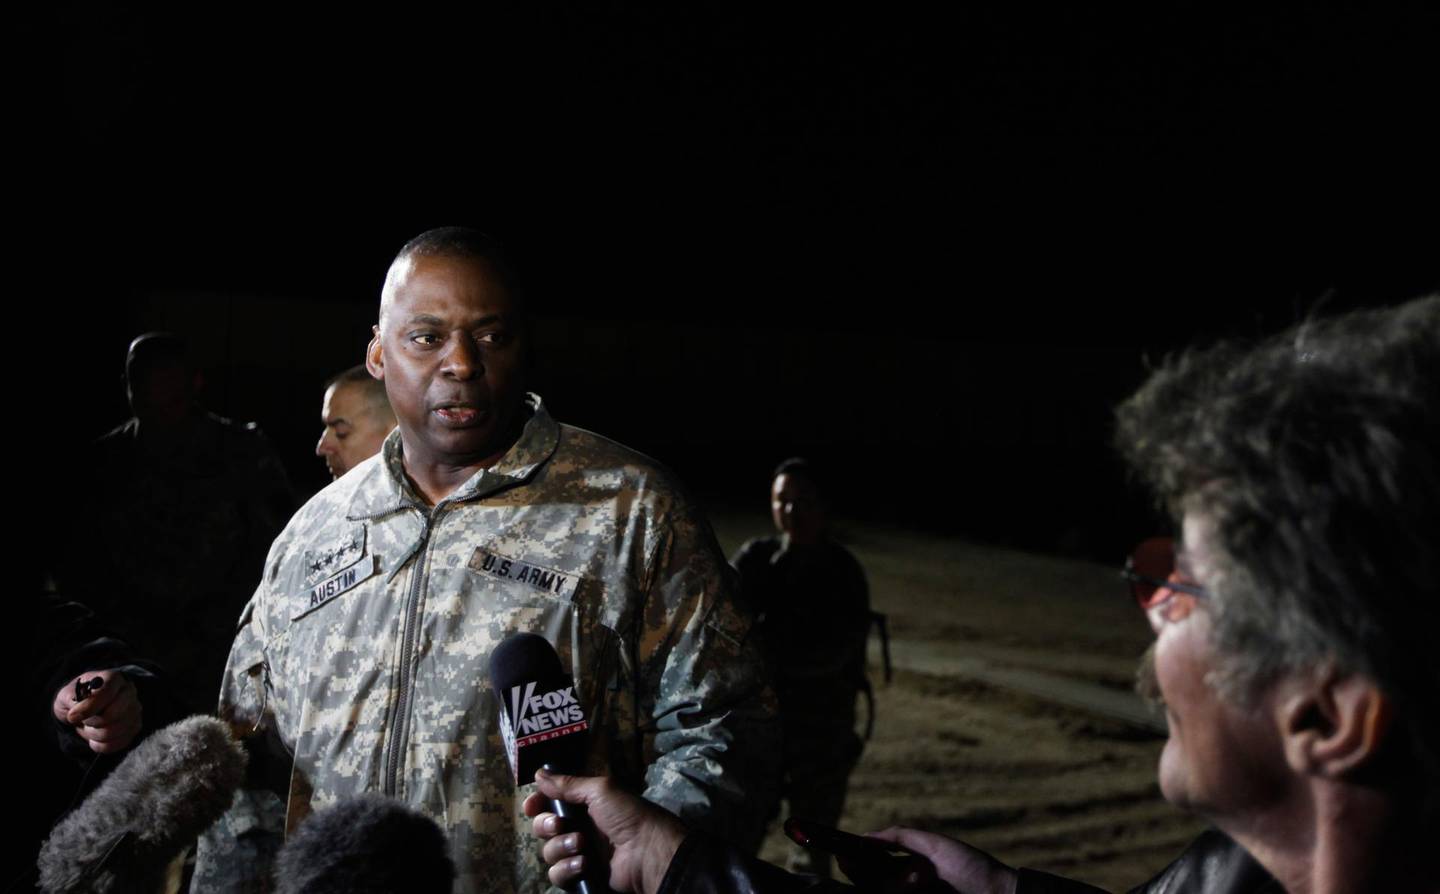 FILE: According to reports, retired four-star Army Gen. Lloyd Austin, is expected to be picked by President-elect Joe Biden to lead the Defense Department. If confirmed by Congress, Austin would be the first Black defense secretary to lead the Pentagon. Austin retired as the commander of U.S. Central Command in the Middle East in 2016, after 41 years in the U.S. Army. NASIRIYAH, IRAQ - DECEMBER 17:  U.S. Army General Lloyd Austin, Commander of U.S. forces in Iraq, speaks with Geraldo (R) following a casing of the colors ceremony at Camp Adder on December 17, 2011 near Nasiriyah, Iraq. All U.S. troops were scheduled to have departed Iraq by December 31st, 2011. At least 4,485 U.S. military personnel died in service in Iraq. According to the Iraq Body Count, more than 100,000 Iraqi civilians have died from war-related violence. (Photo by Lucas Jackson-Pool/Getty Images)